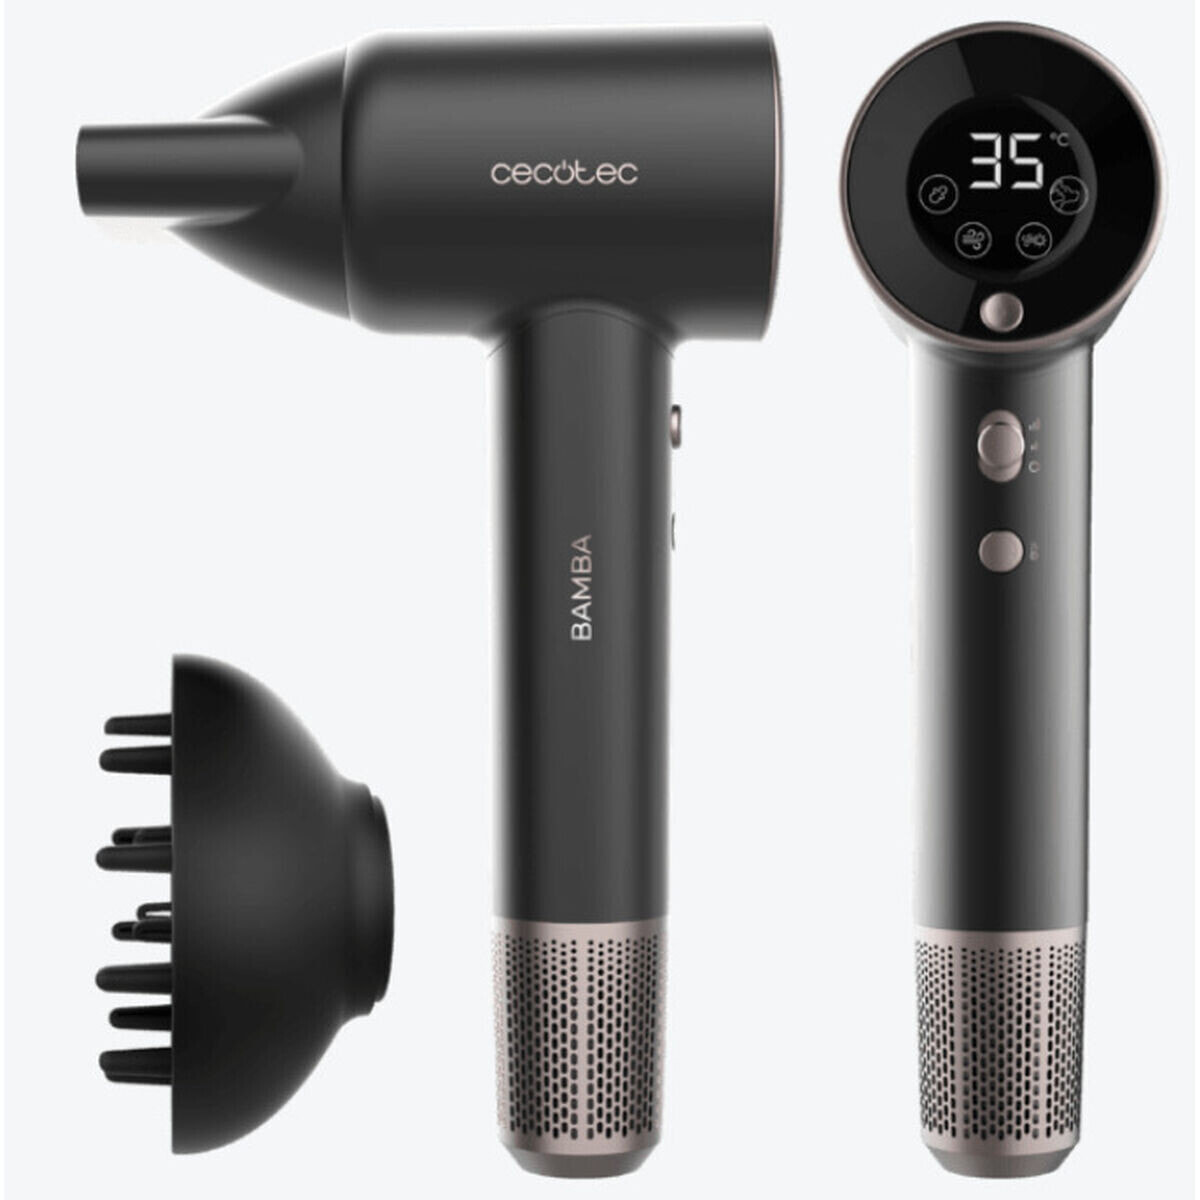 Hairdryer Cecotec IoniCare RockStar AirSonic